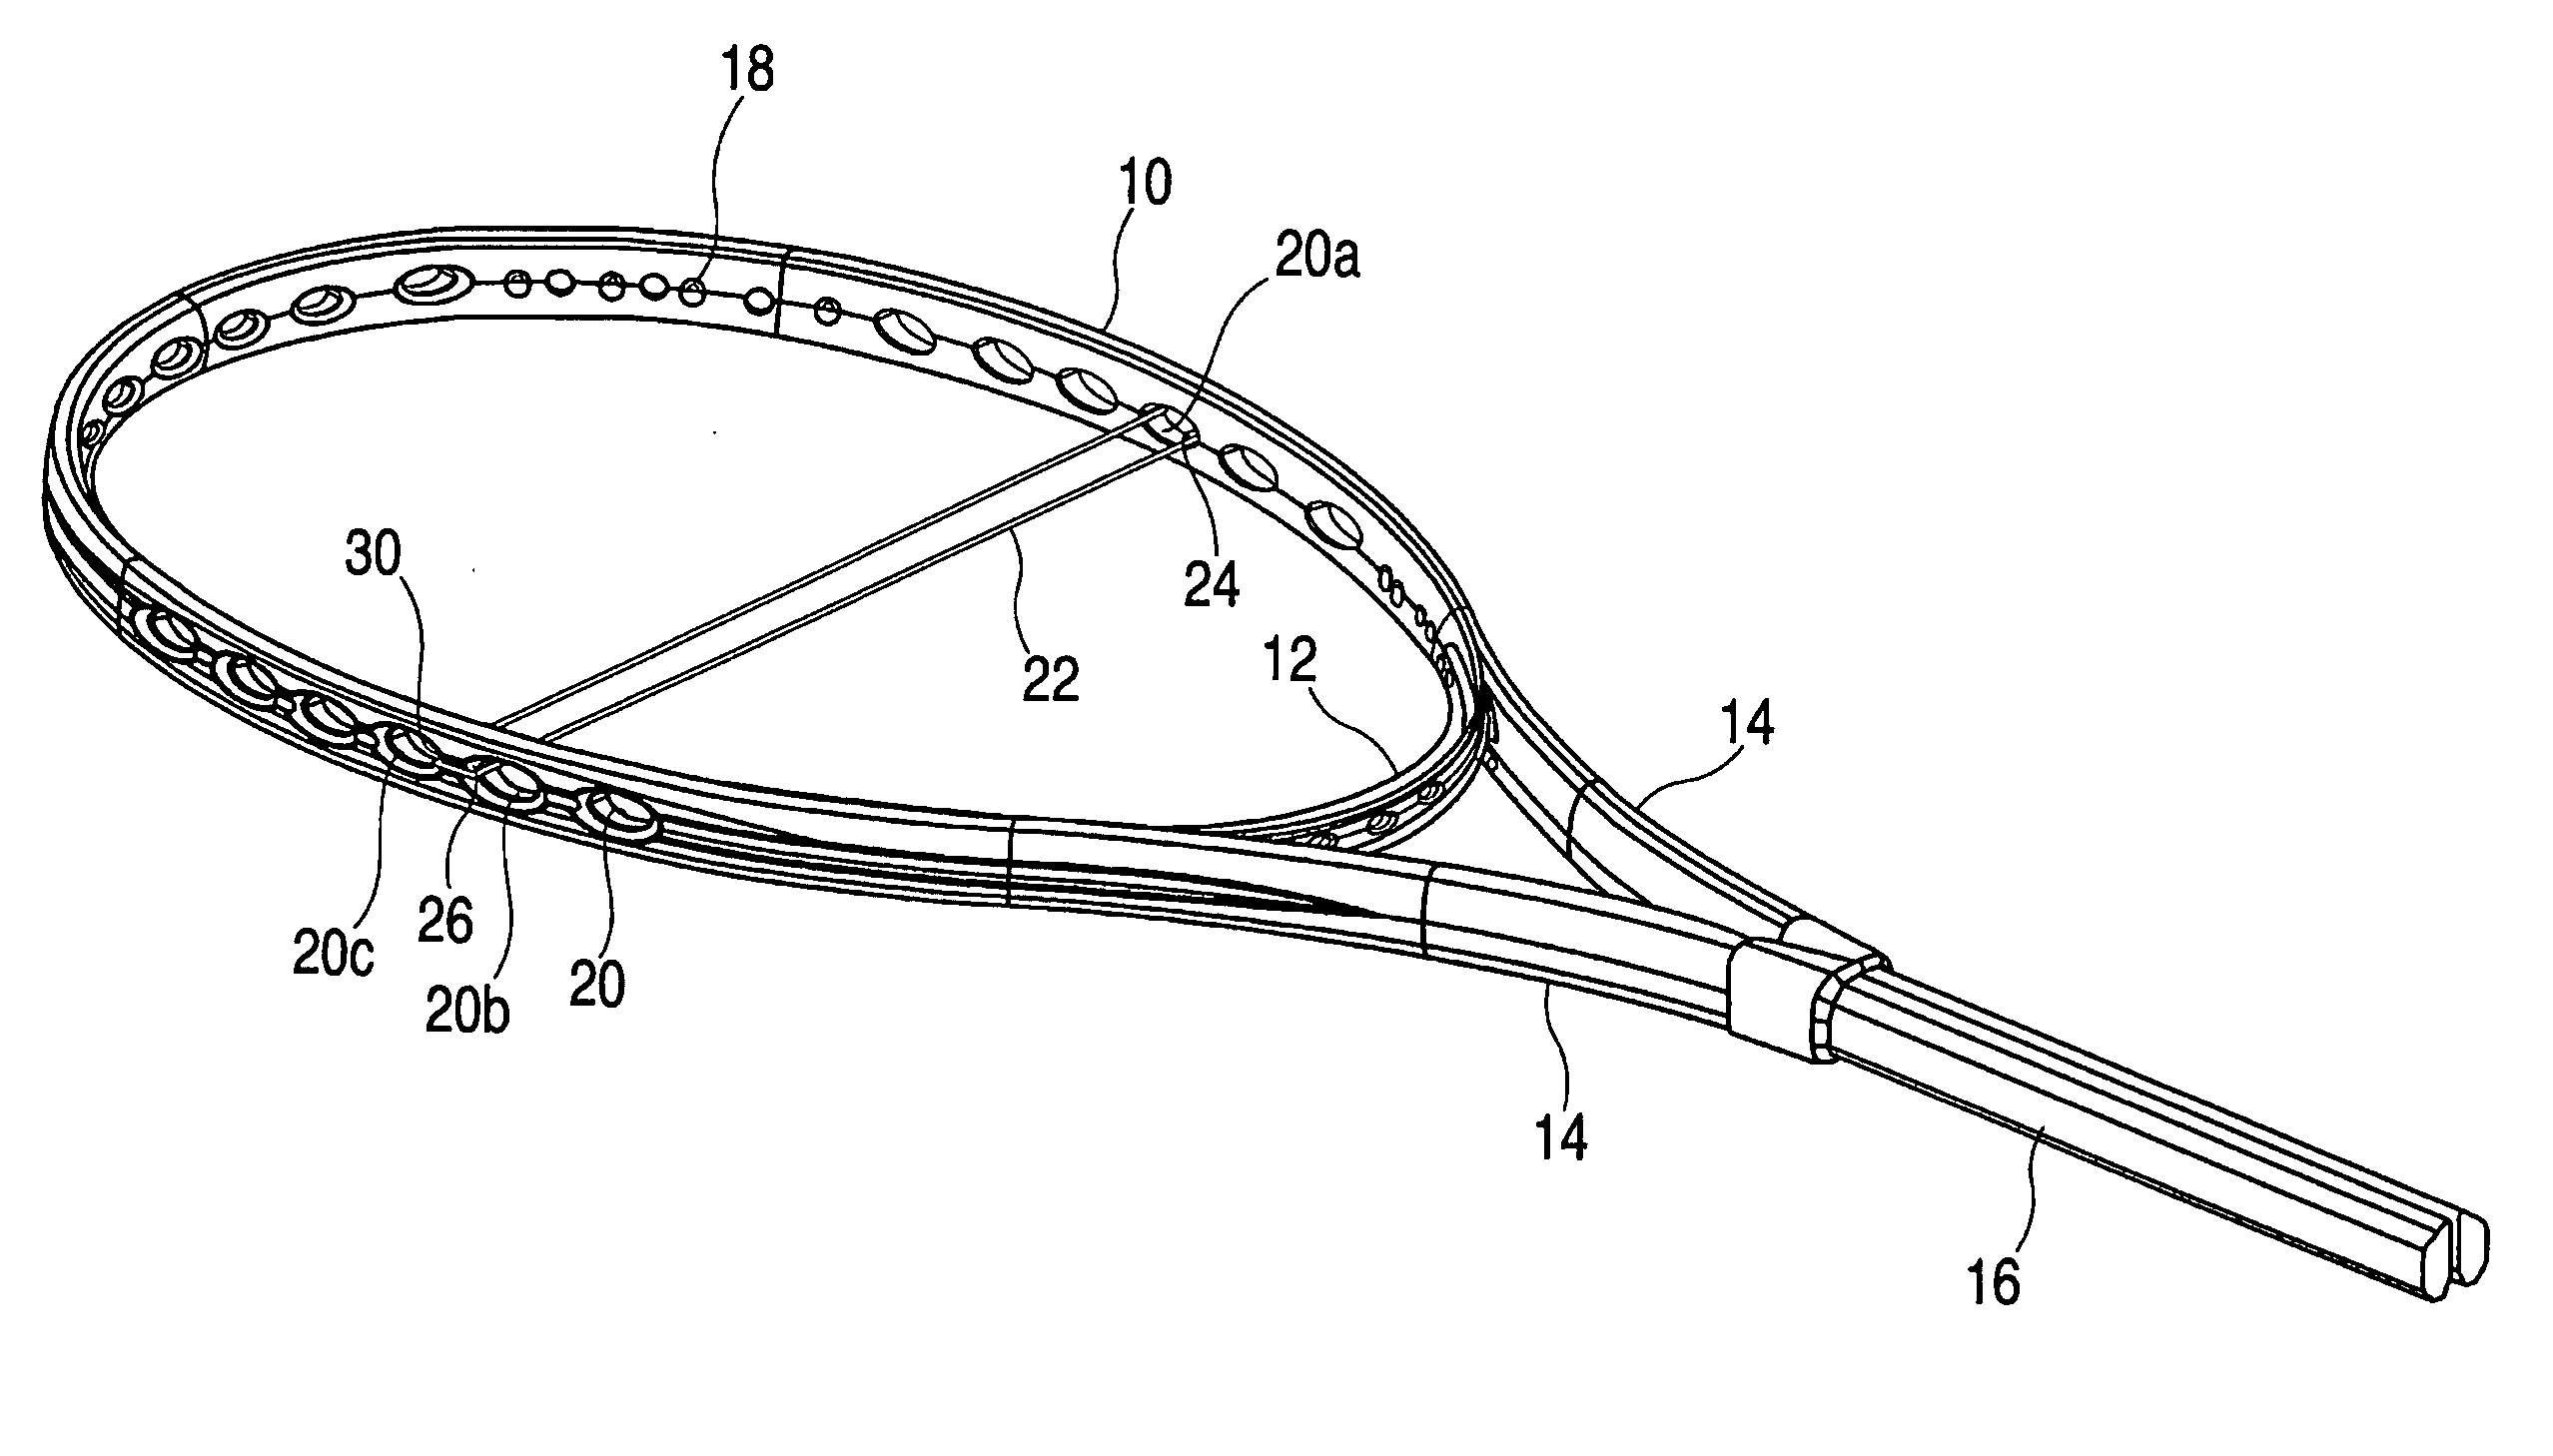 Sports racquet with string port holes